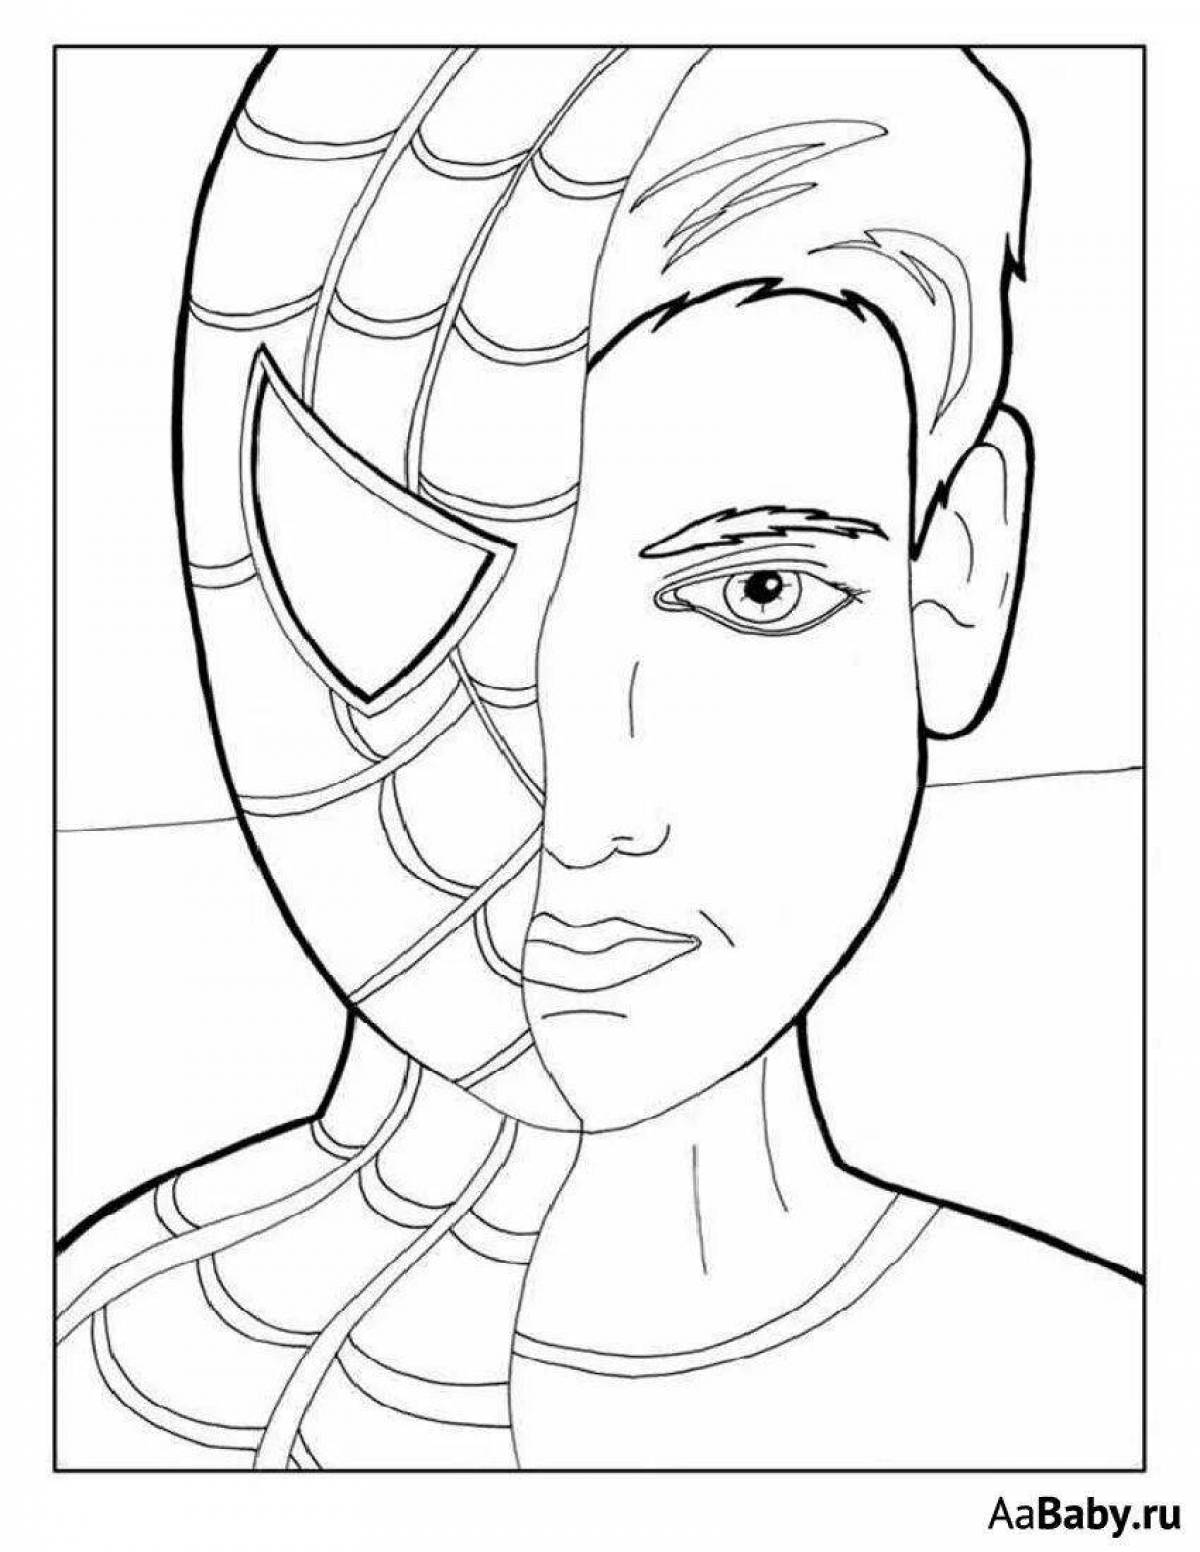 Peter parker cool coloring book